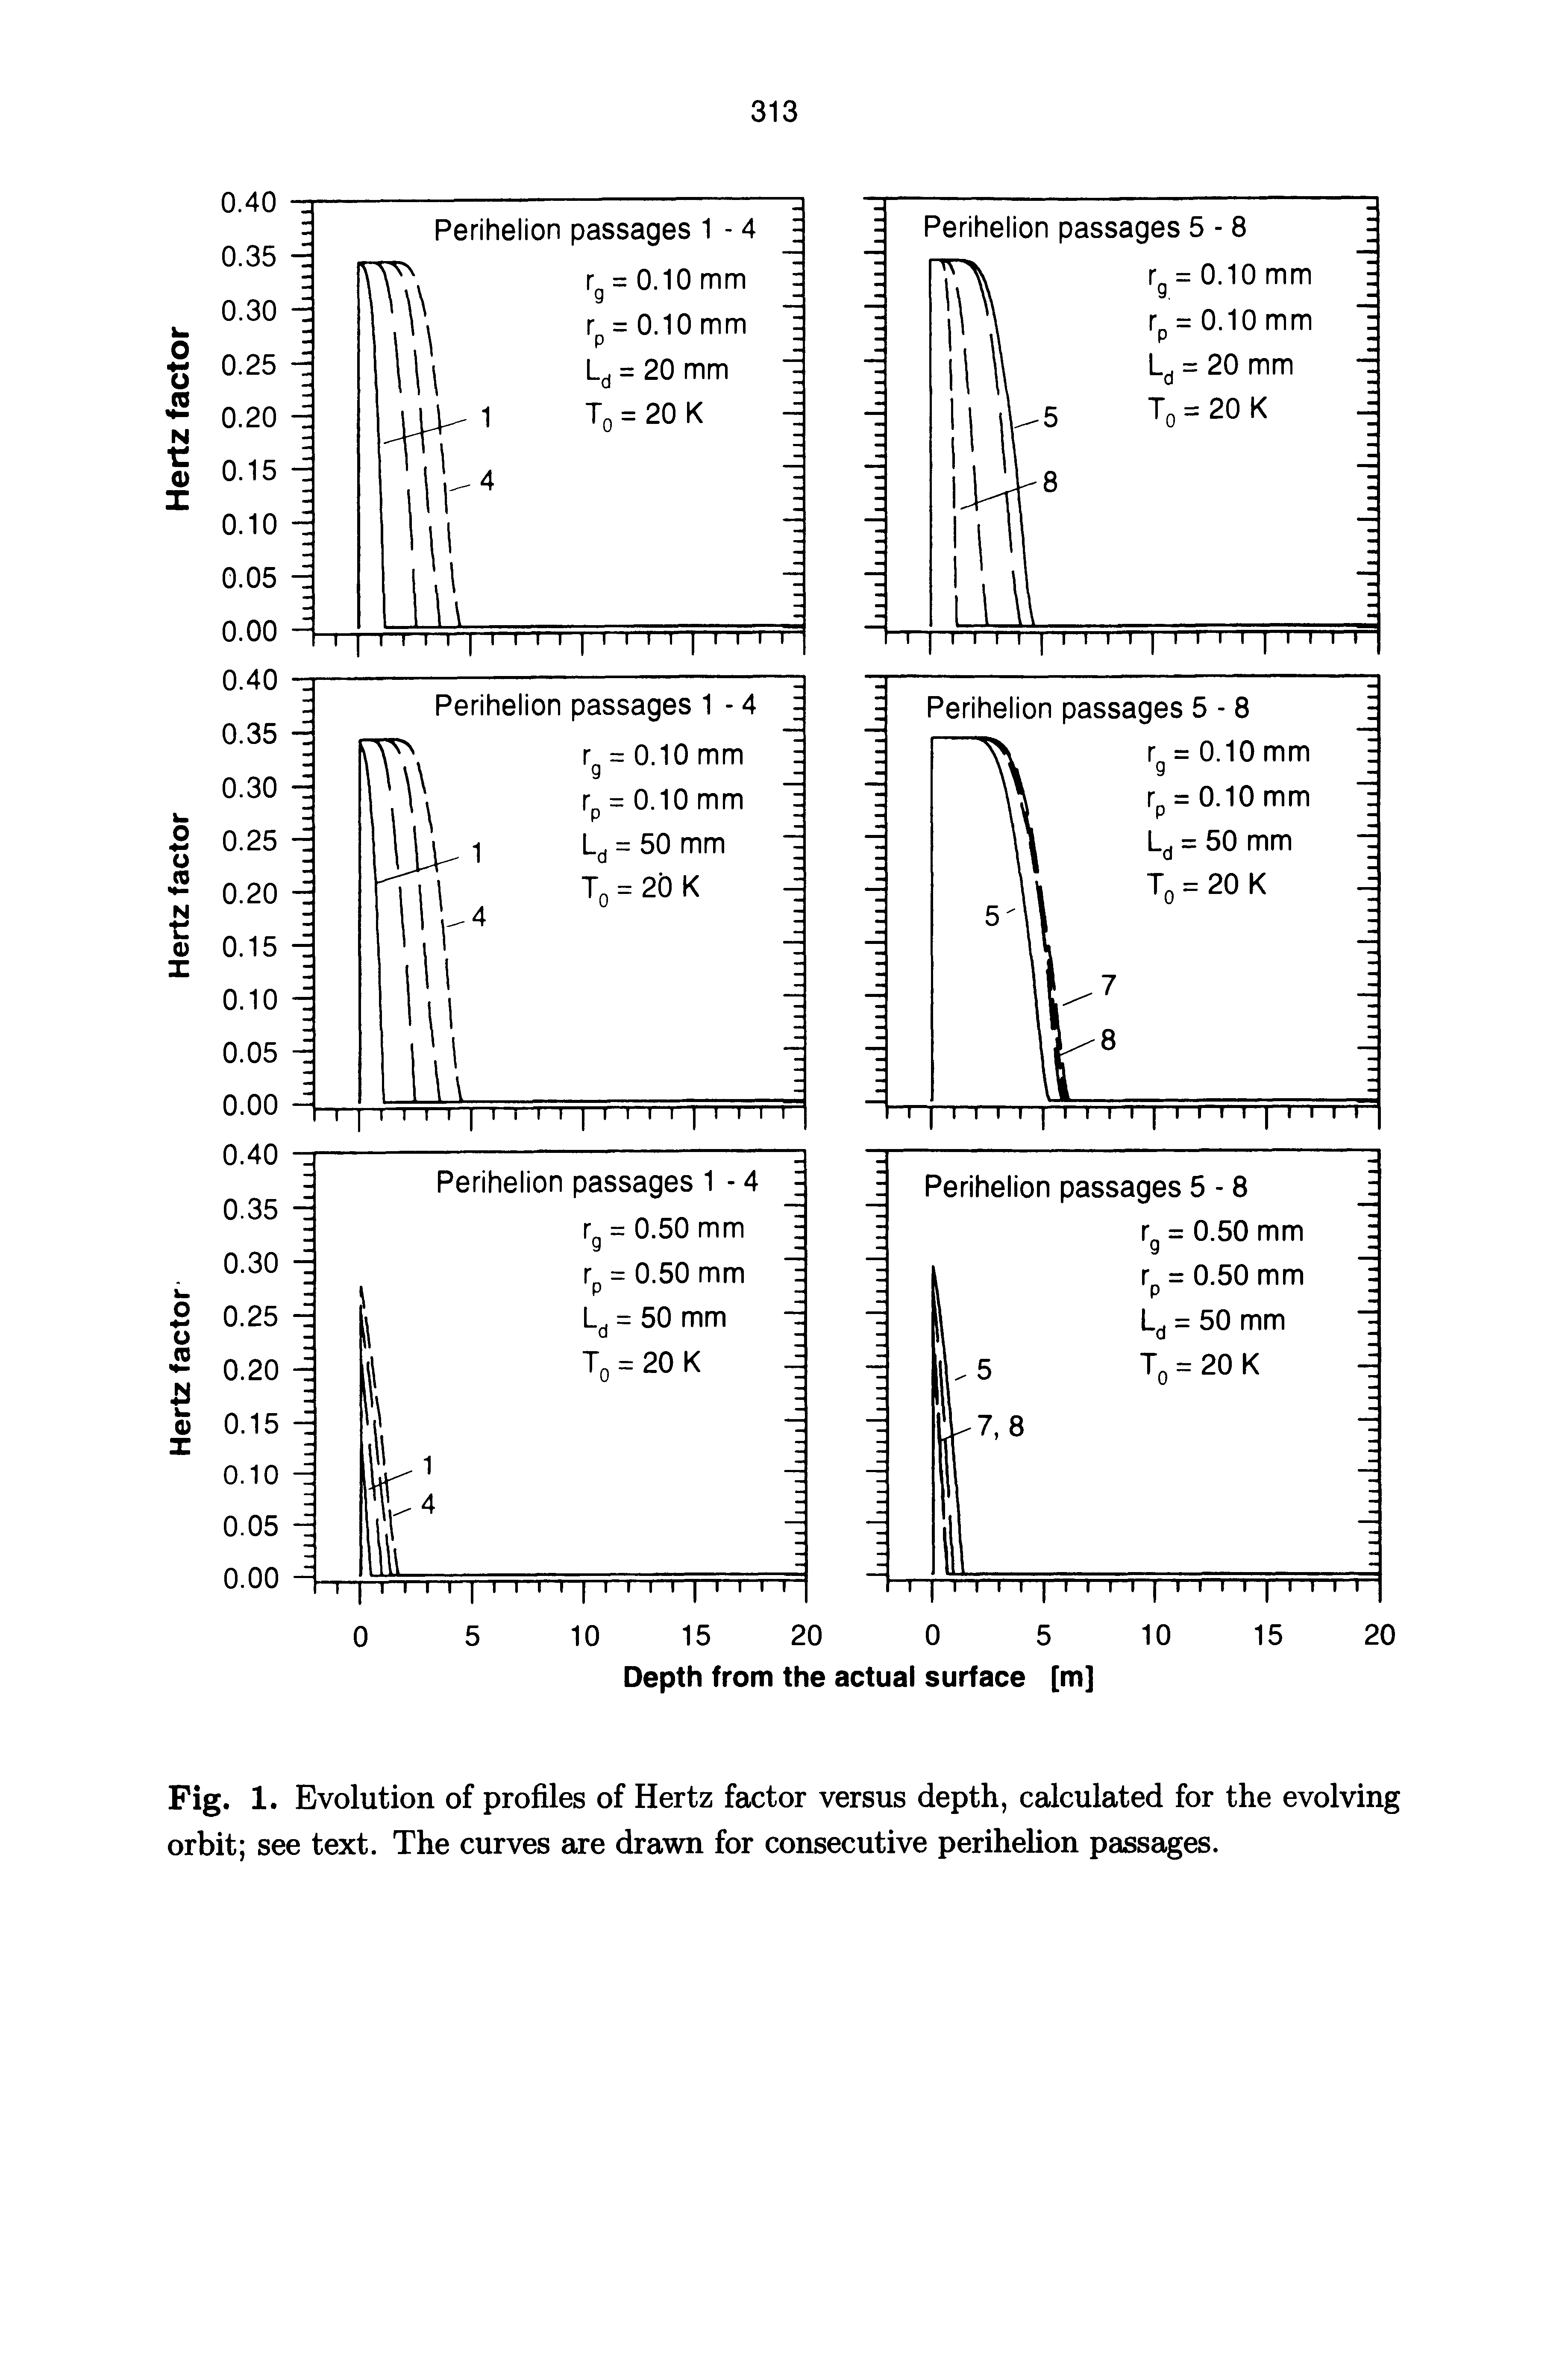 Fig. 1. Evolution of profiles of Hertz factor versus depth, calculated for the evolving orbit see text. The curves are drawn for consecutive perihehon passages.